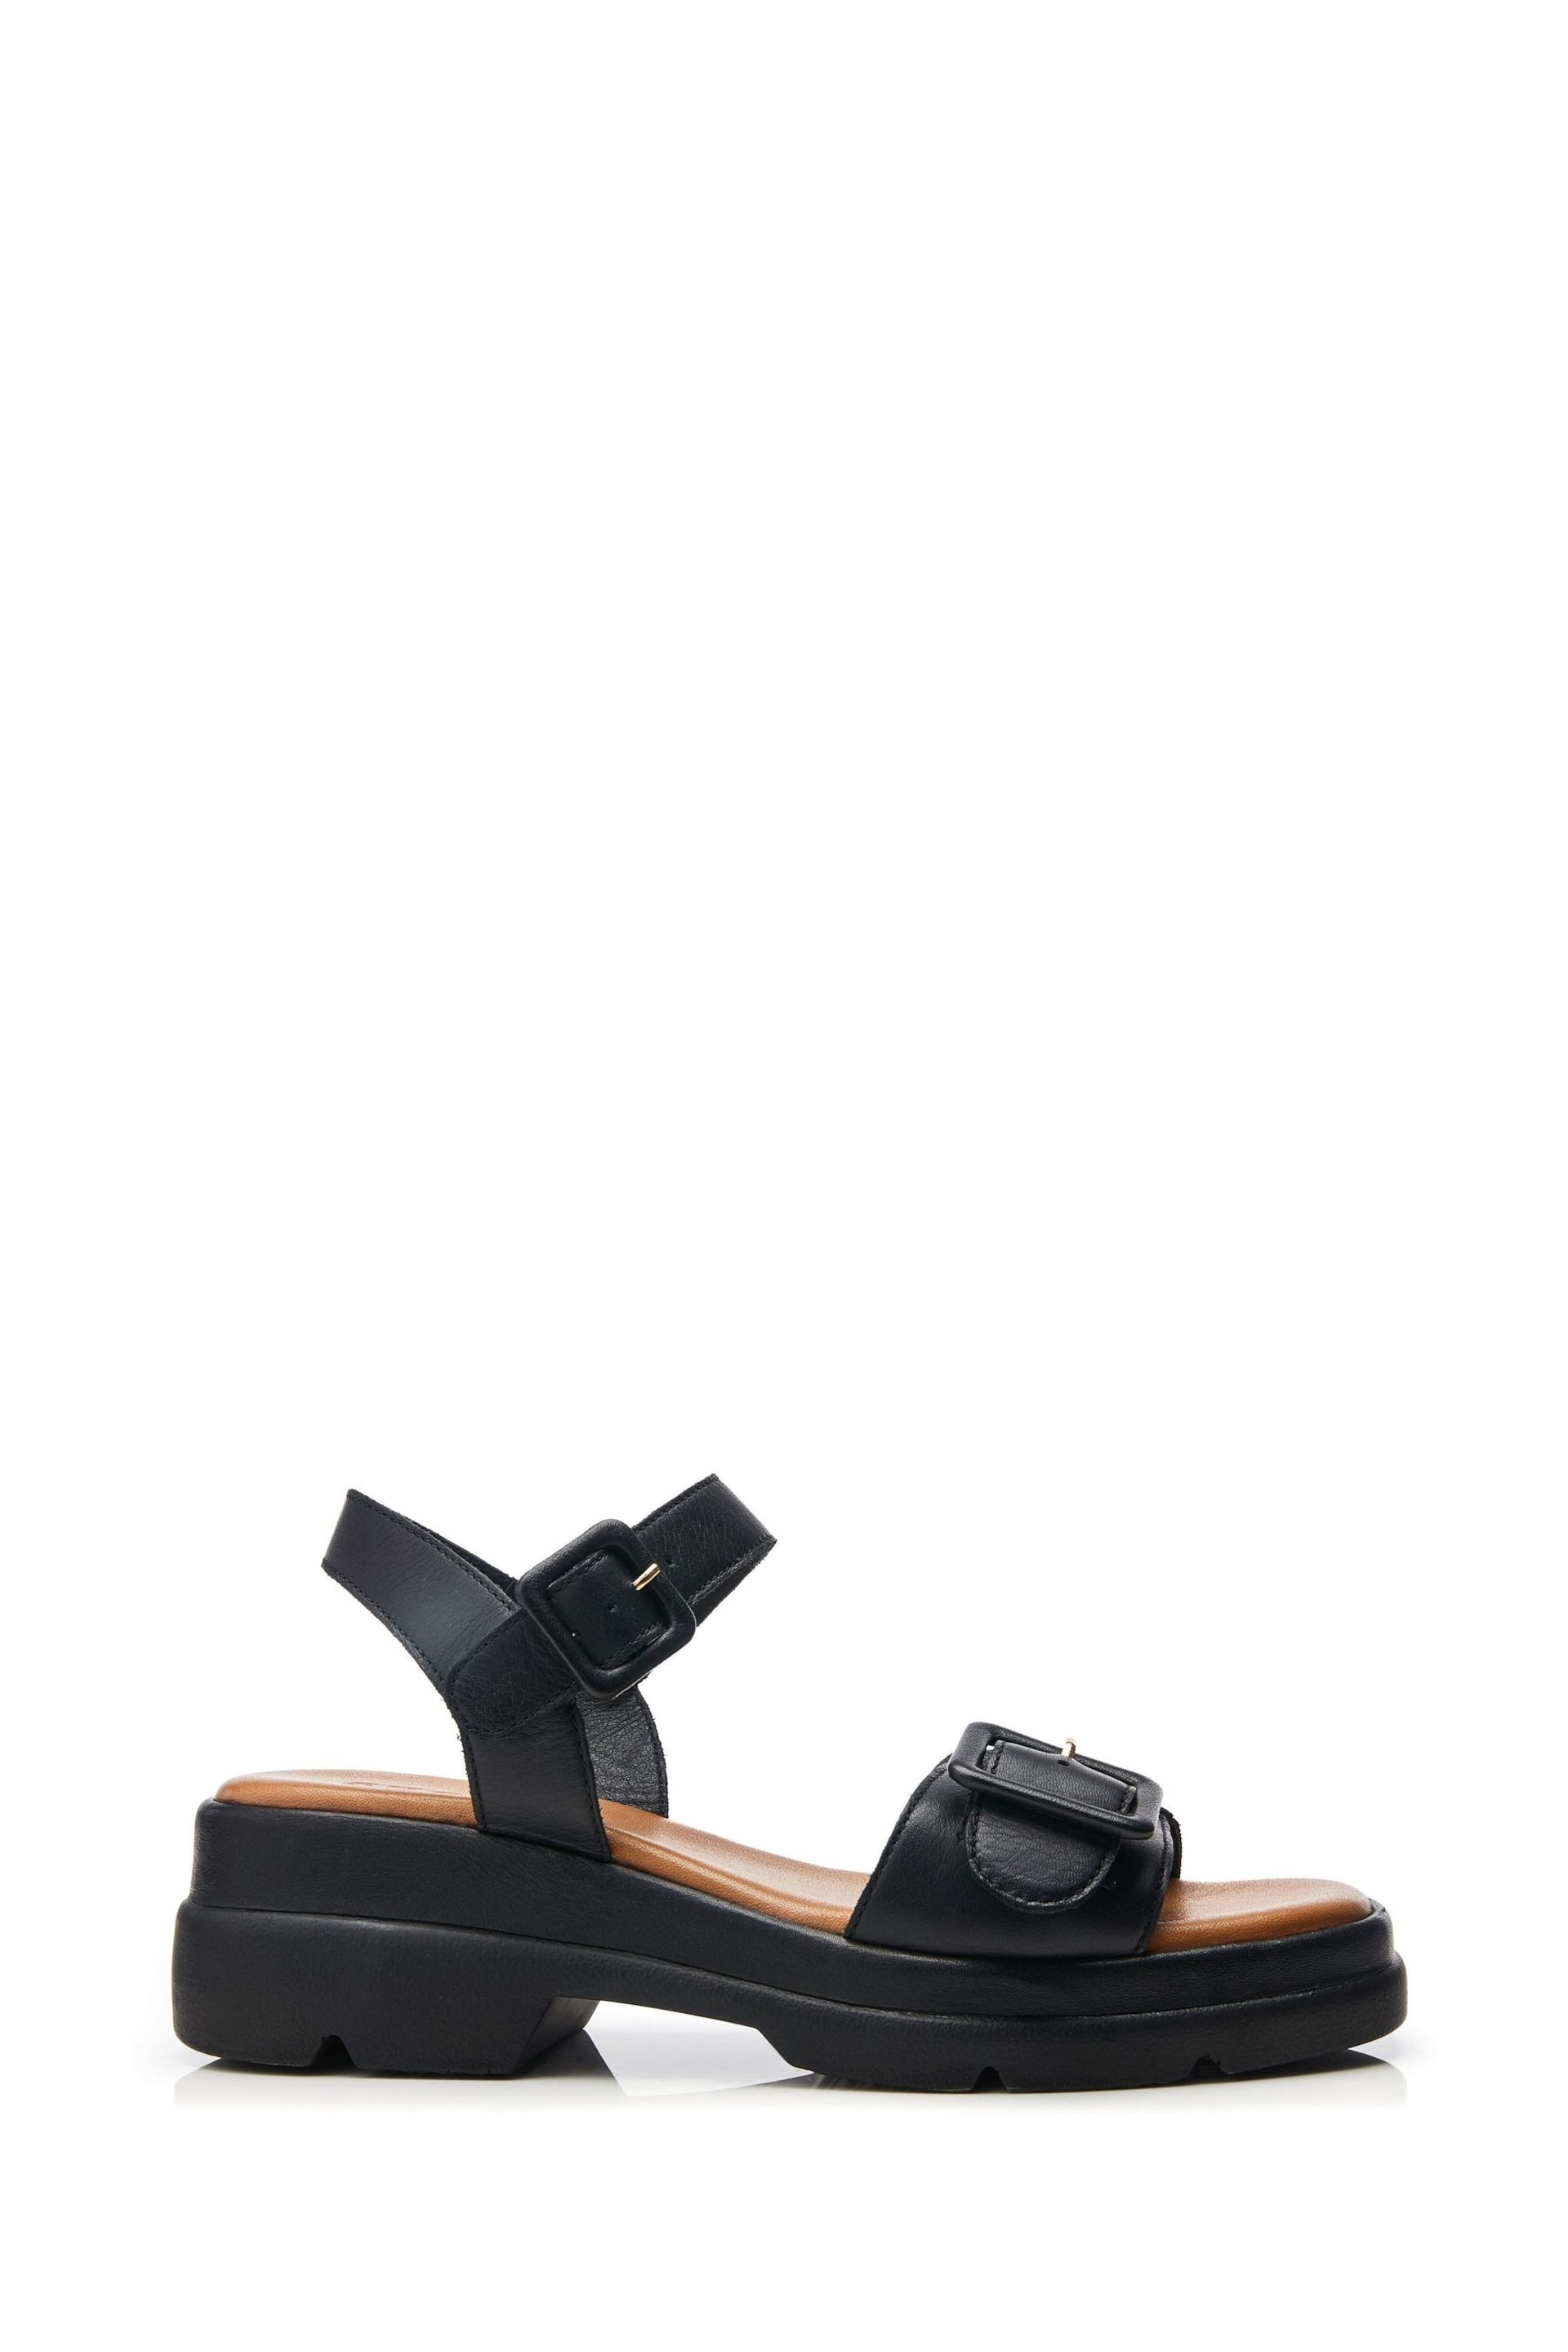 Moda in Pelle SH Shore Open Waist with Strap & Buckle Vamp Sandals - Image 1 of 4